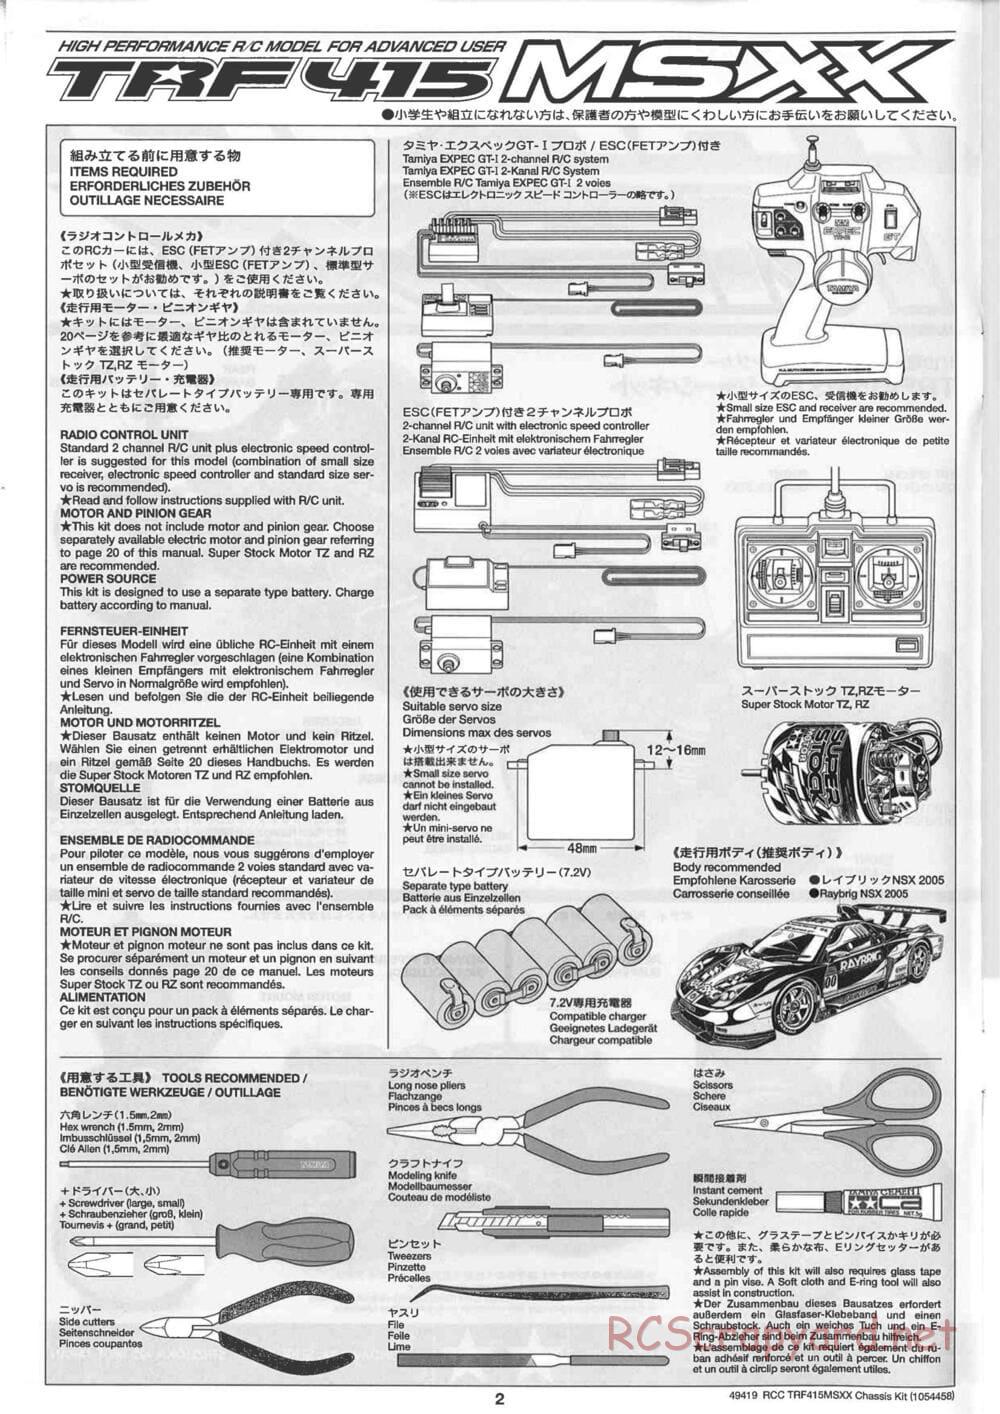 Tamiya - TRF415-MSXX Chassis - Manual - Page 2